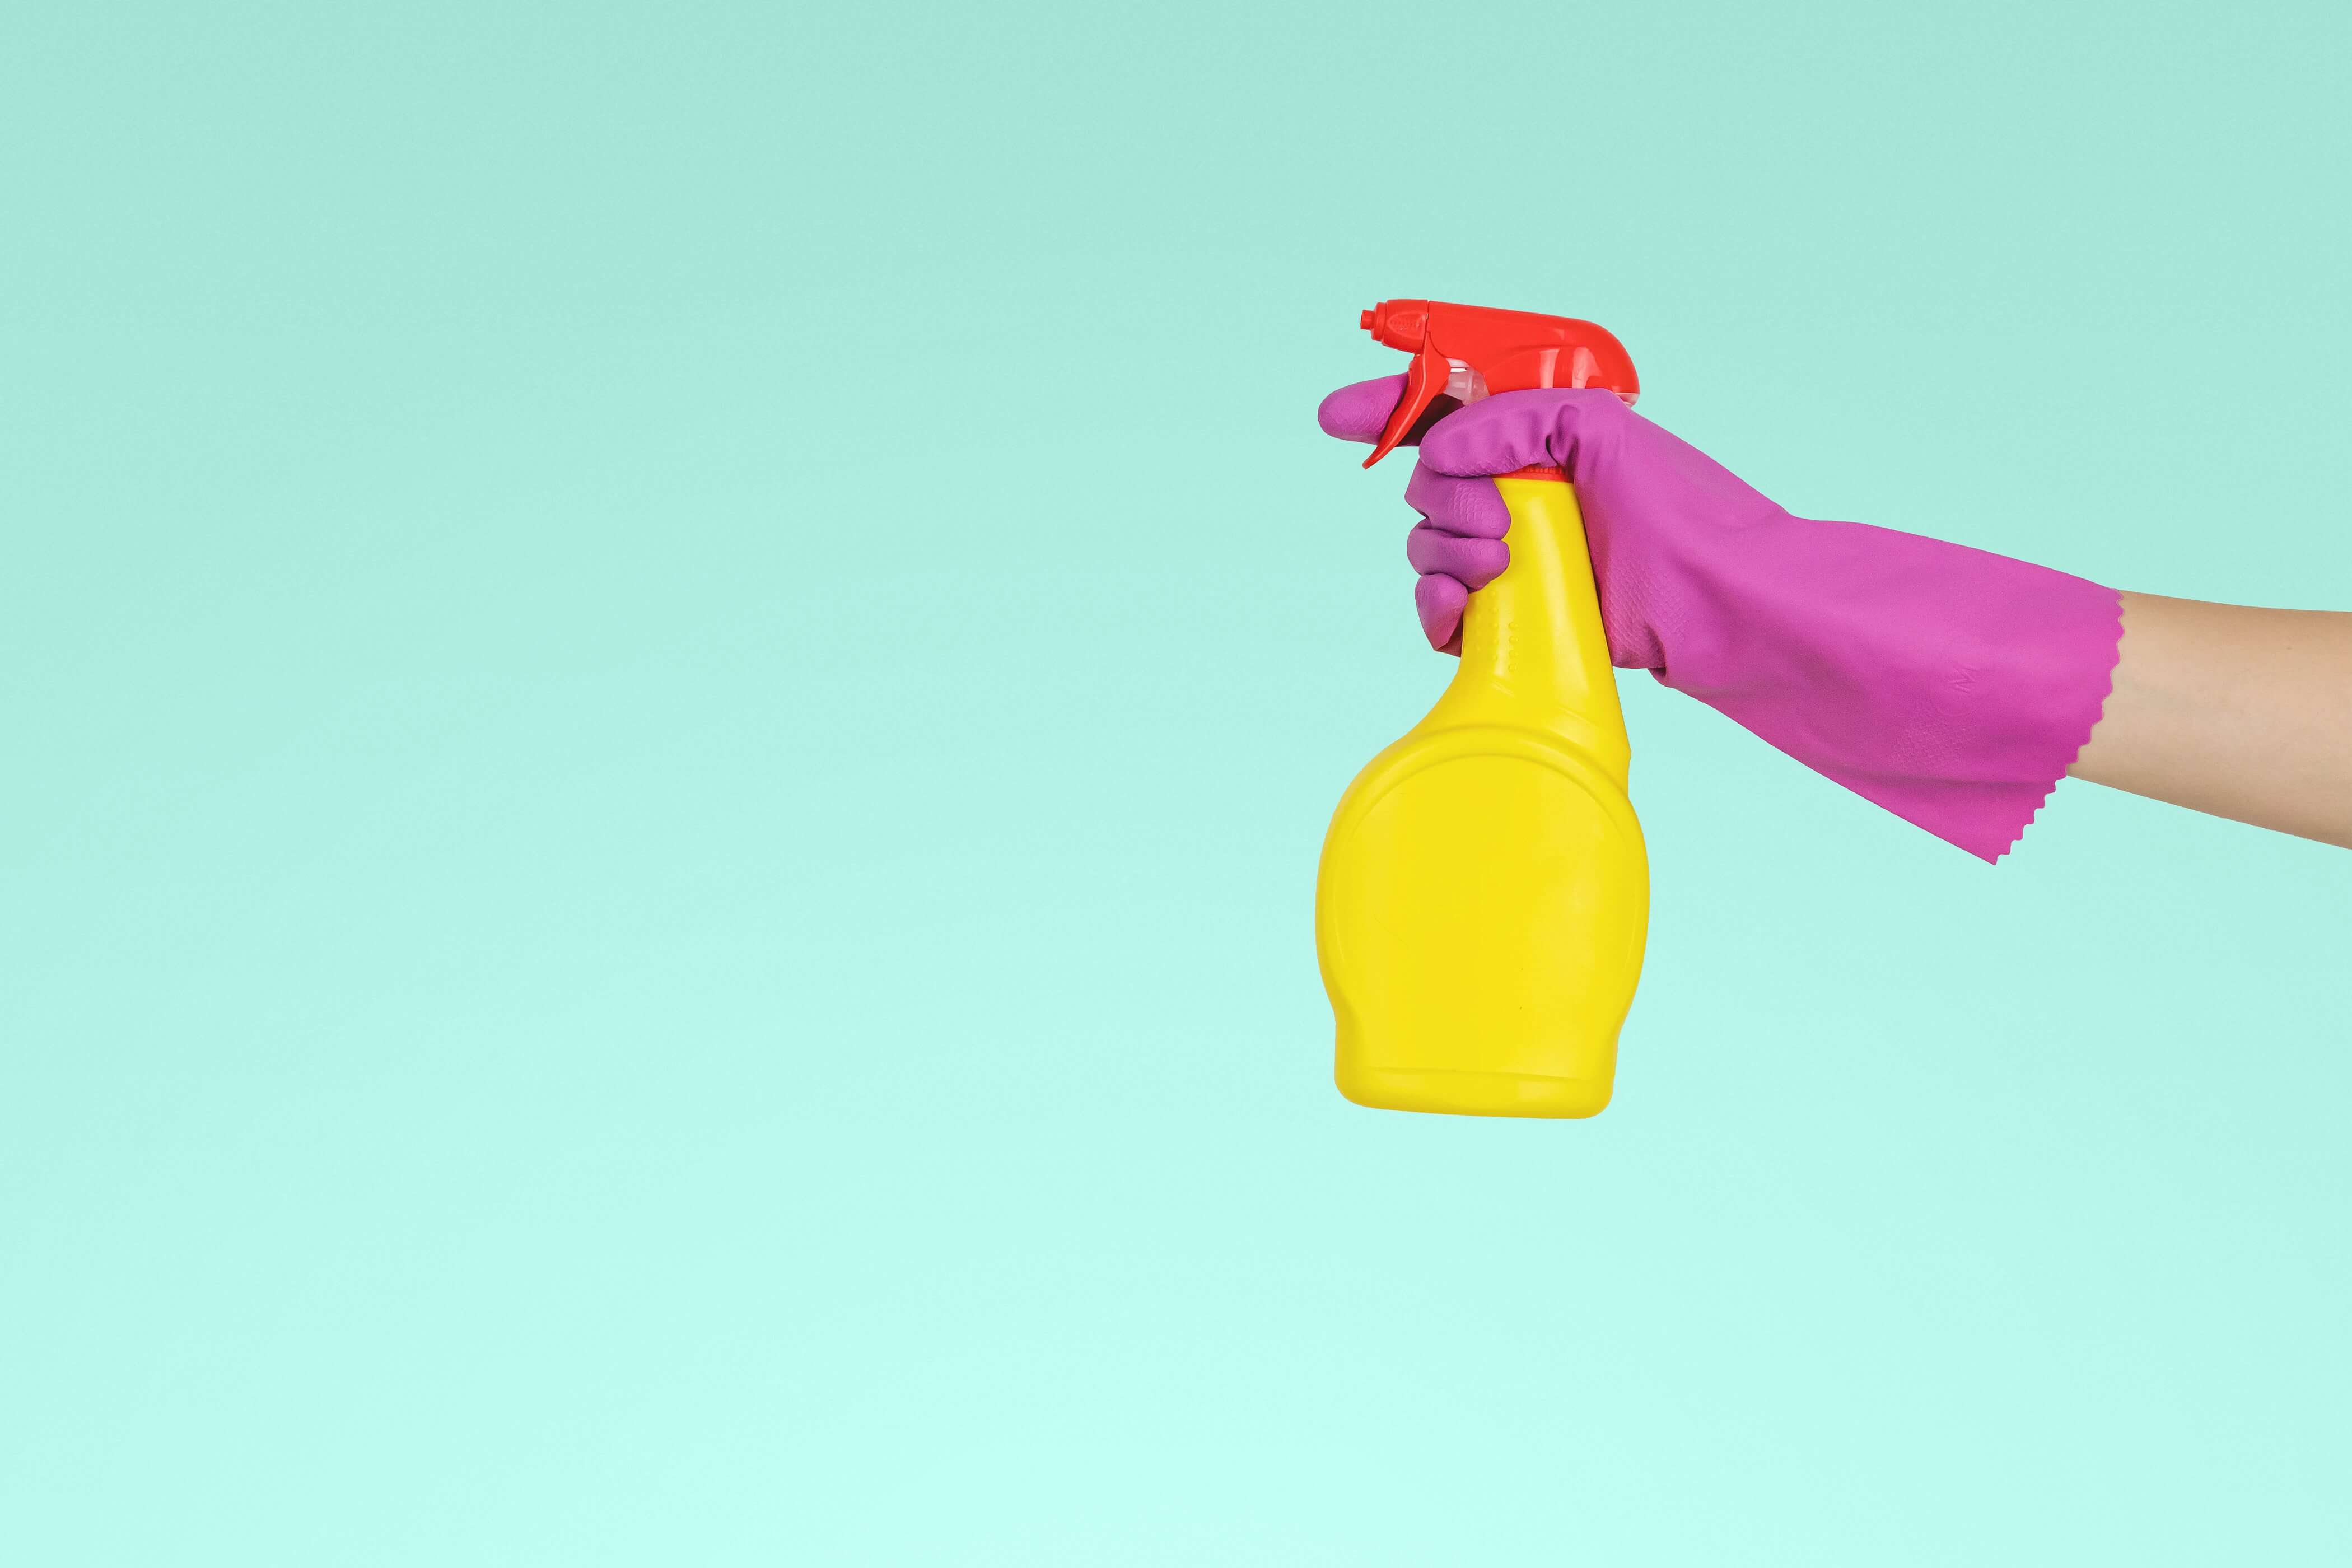 A hand wearing pink rubber gloved getting to use a yellow spray bottle with a red nozzle.